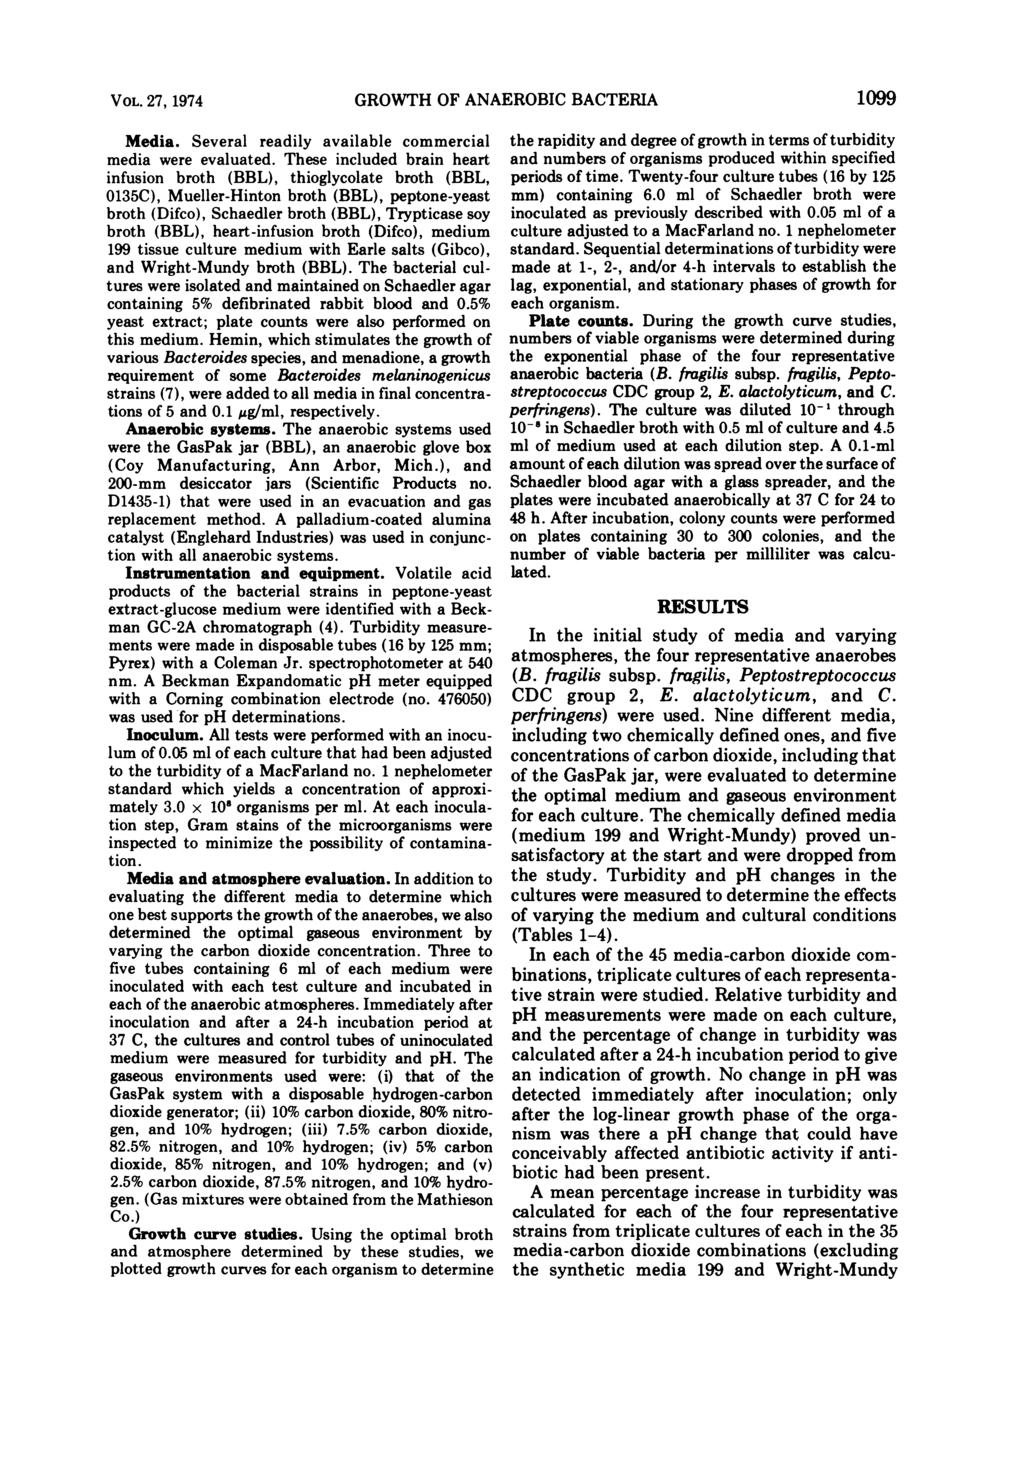 VOL. 27, 1974 Media. Several readily available commercial media were evaluated.